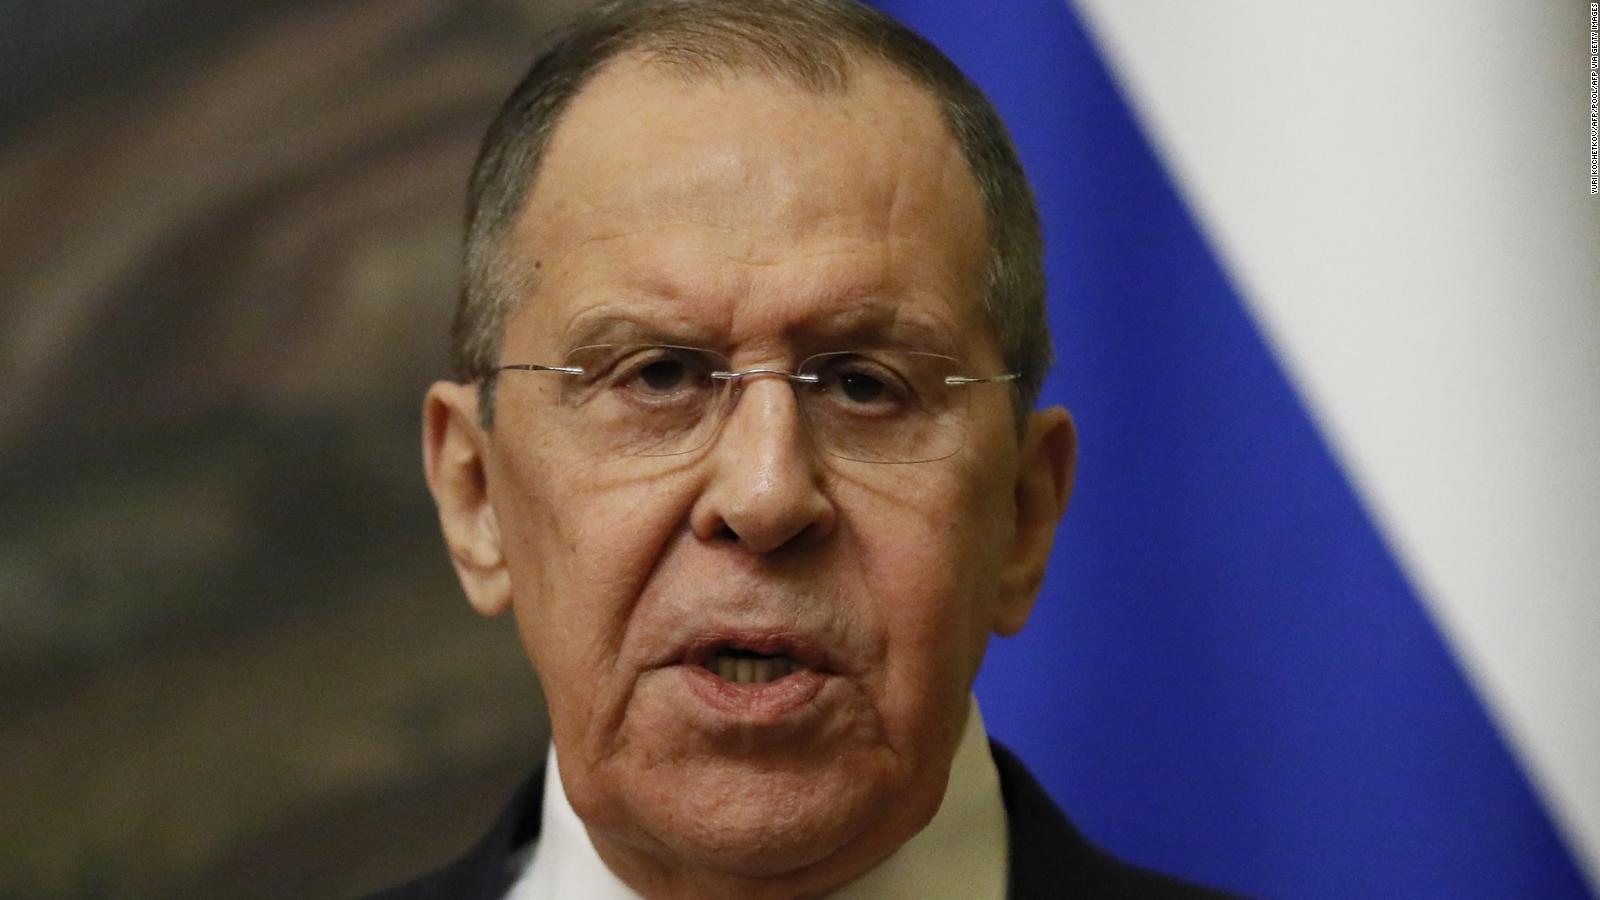 The Lavrov comment that angered Israel